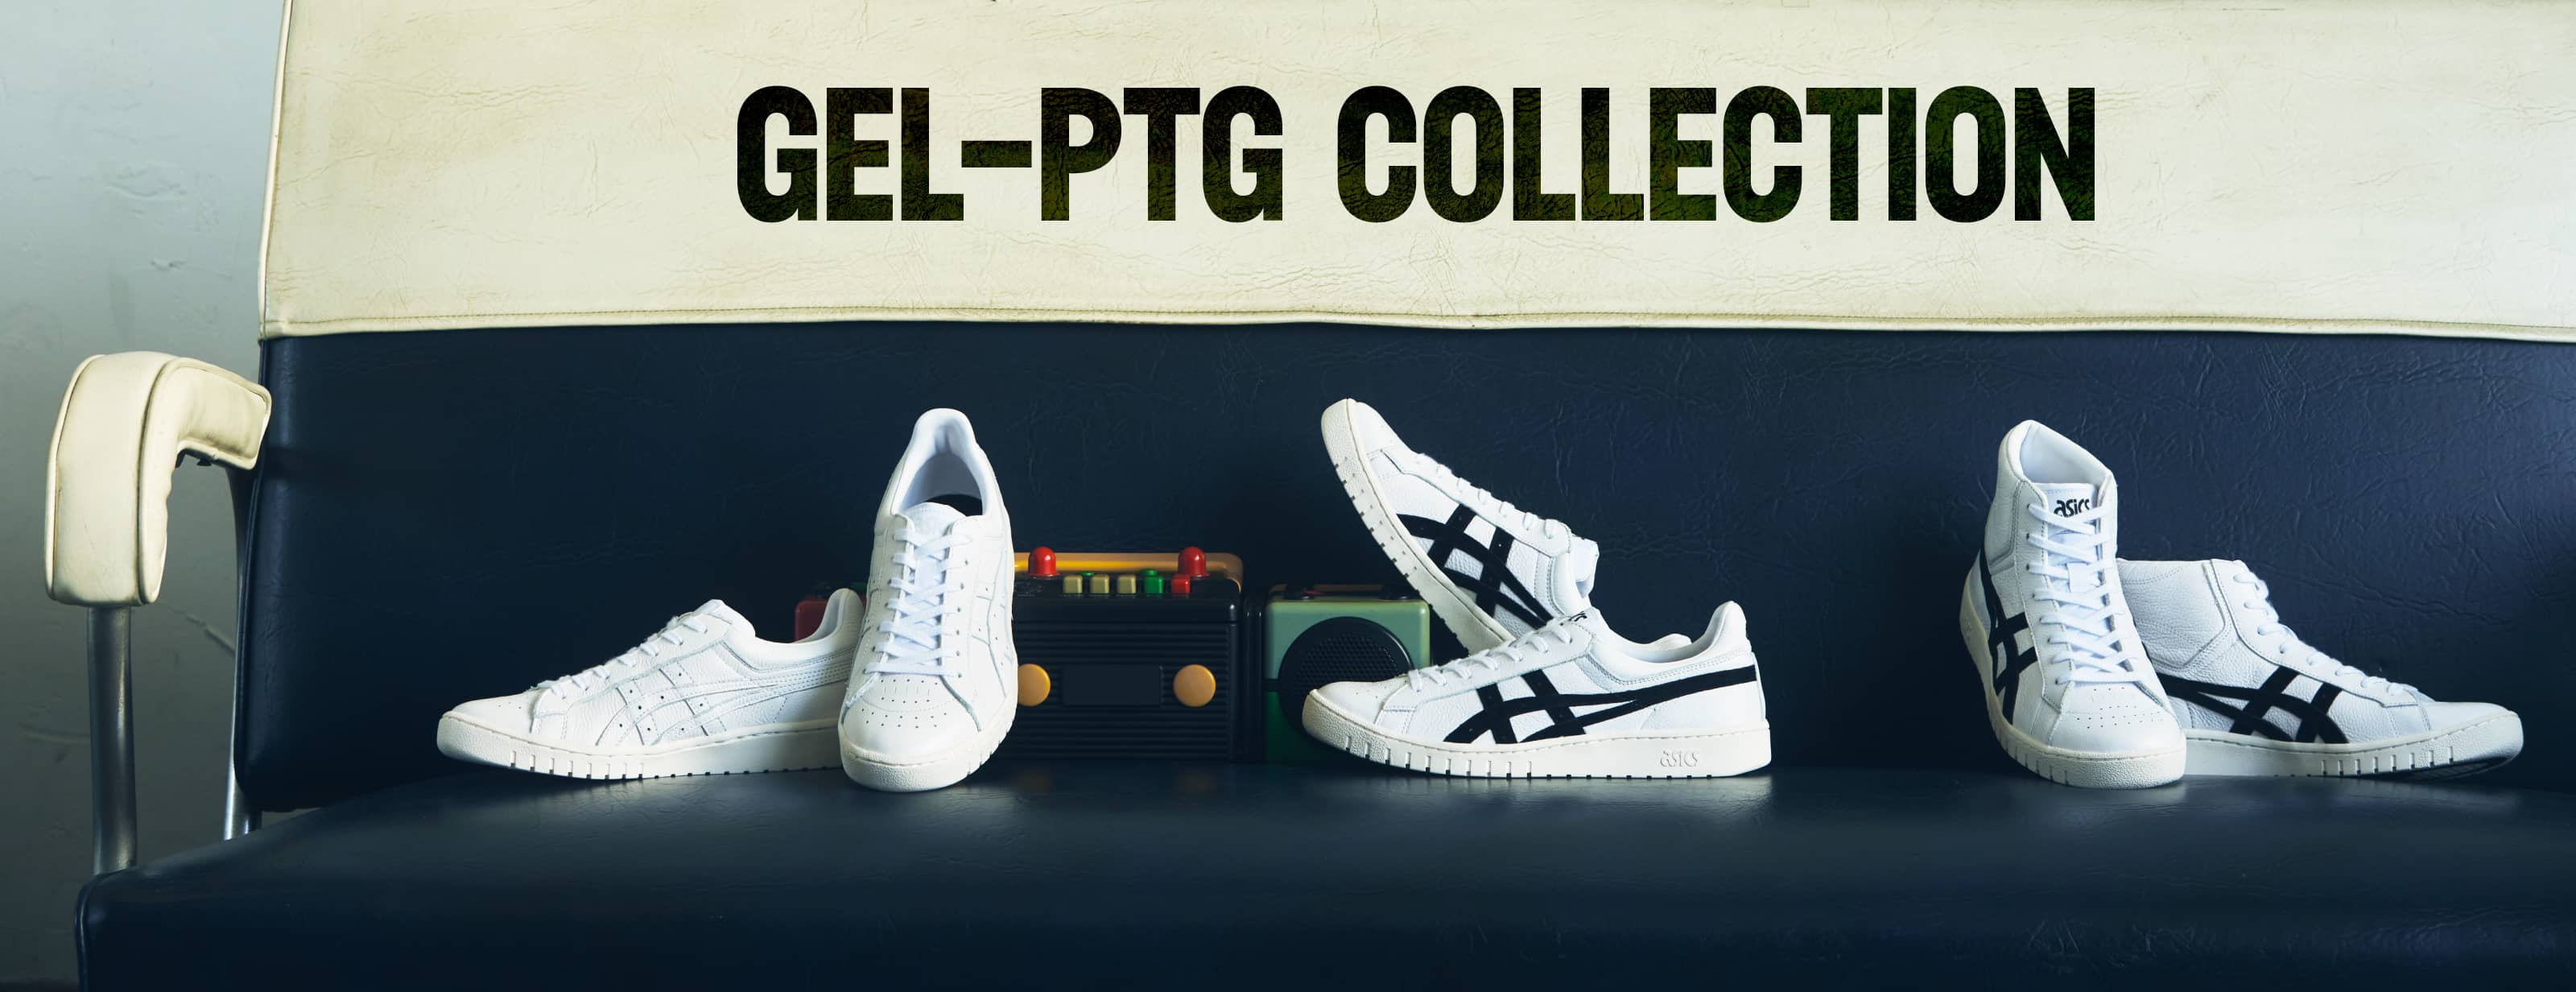 GEL-PTG COLLECTION